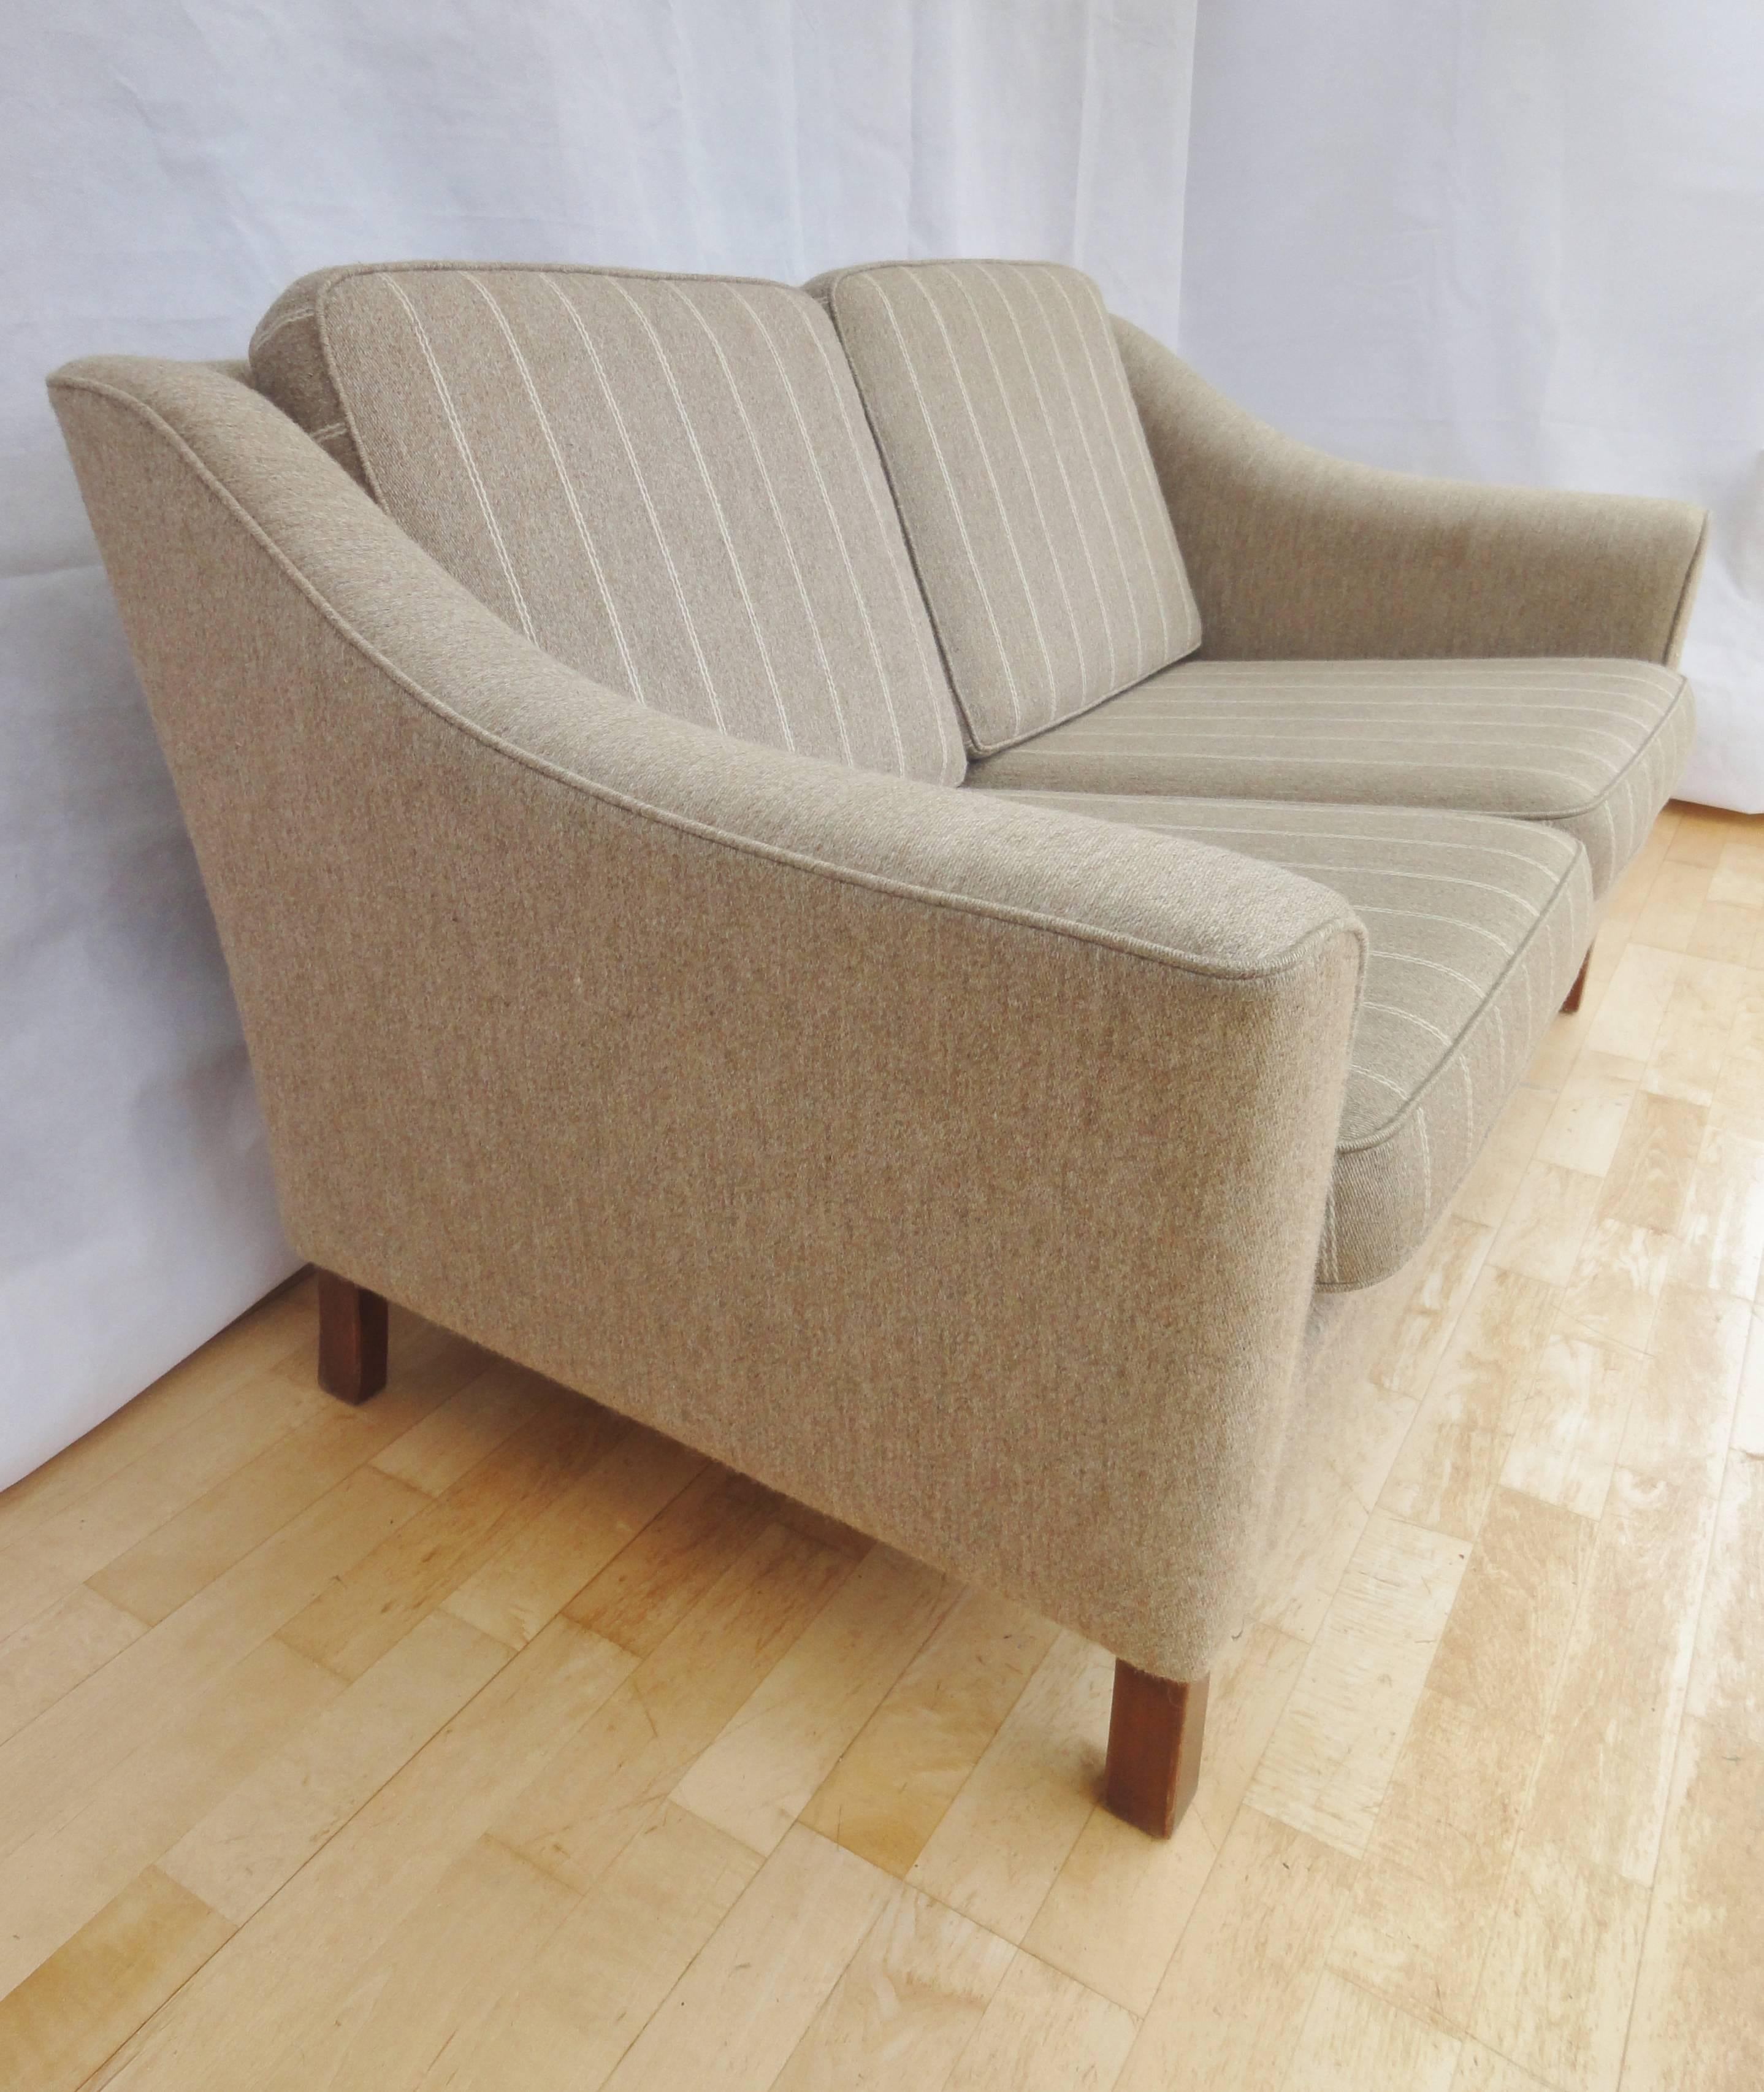 Designer: Danish design.

Manufacturer: Unknown.

Country: Denmark.

Date: 1950s-1960s.

Material: Woollen oatmeal upholstery with lighter pinstripe to the cushions and mahogany legs.

Maximum dimensions: 138cm wide 79cm deep and 78cm